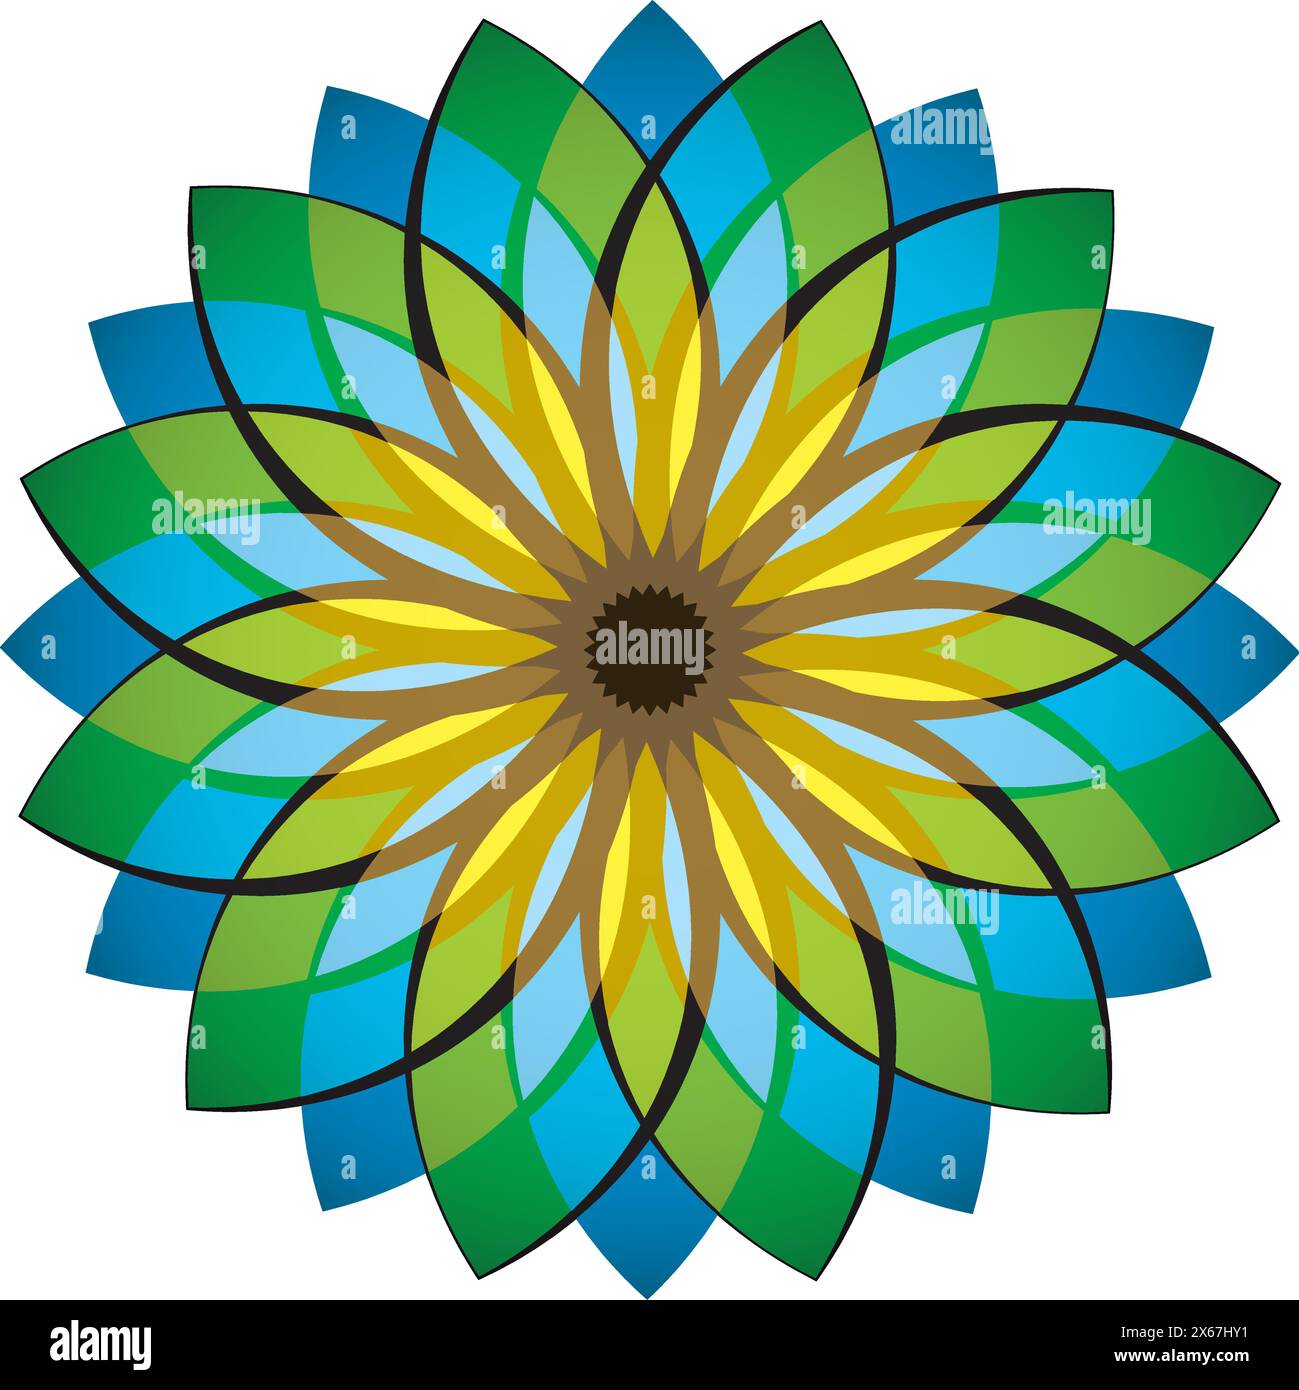 Symmetrical and radiant Mandala illustration with shades of green, yellow, blue, and brown Stock Vector